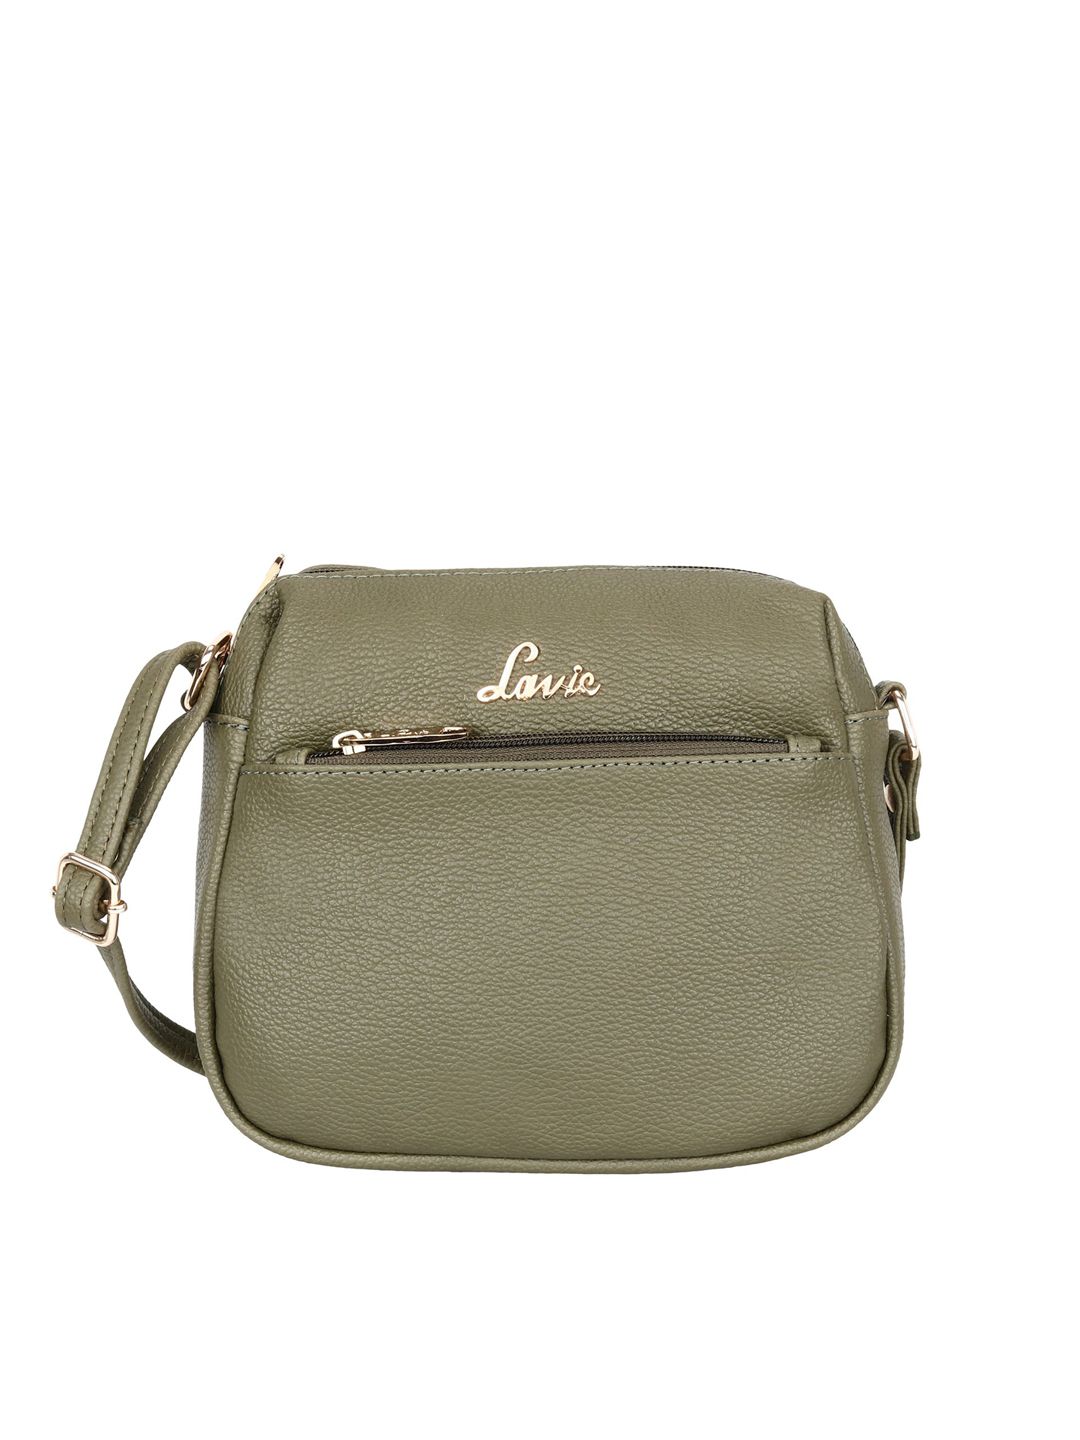 Lavie Olive Green Structured Sling Bag Price in India